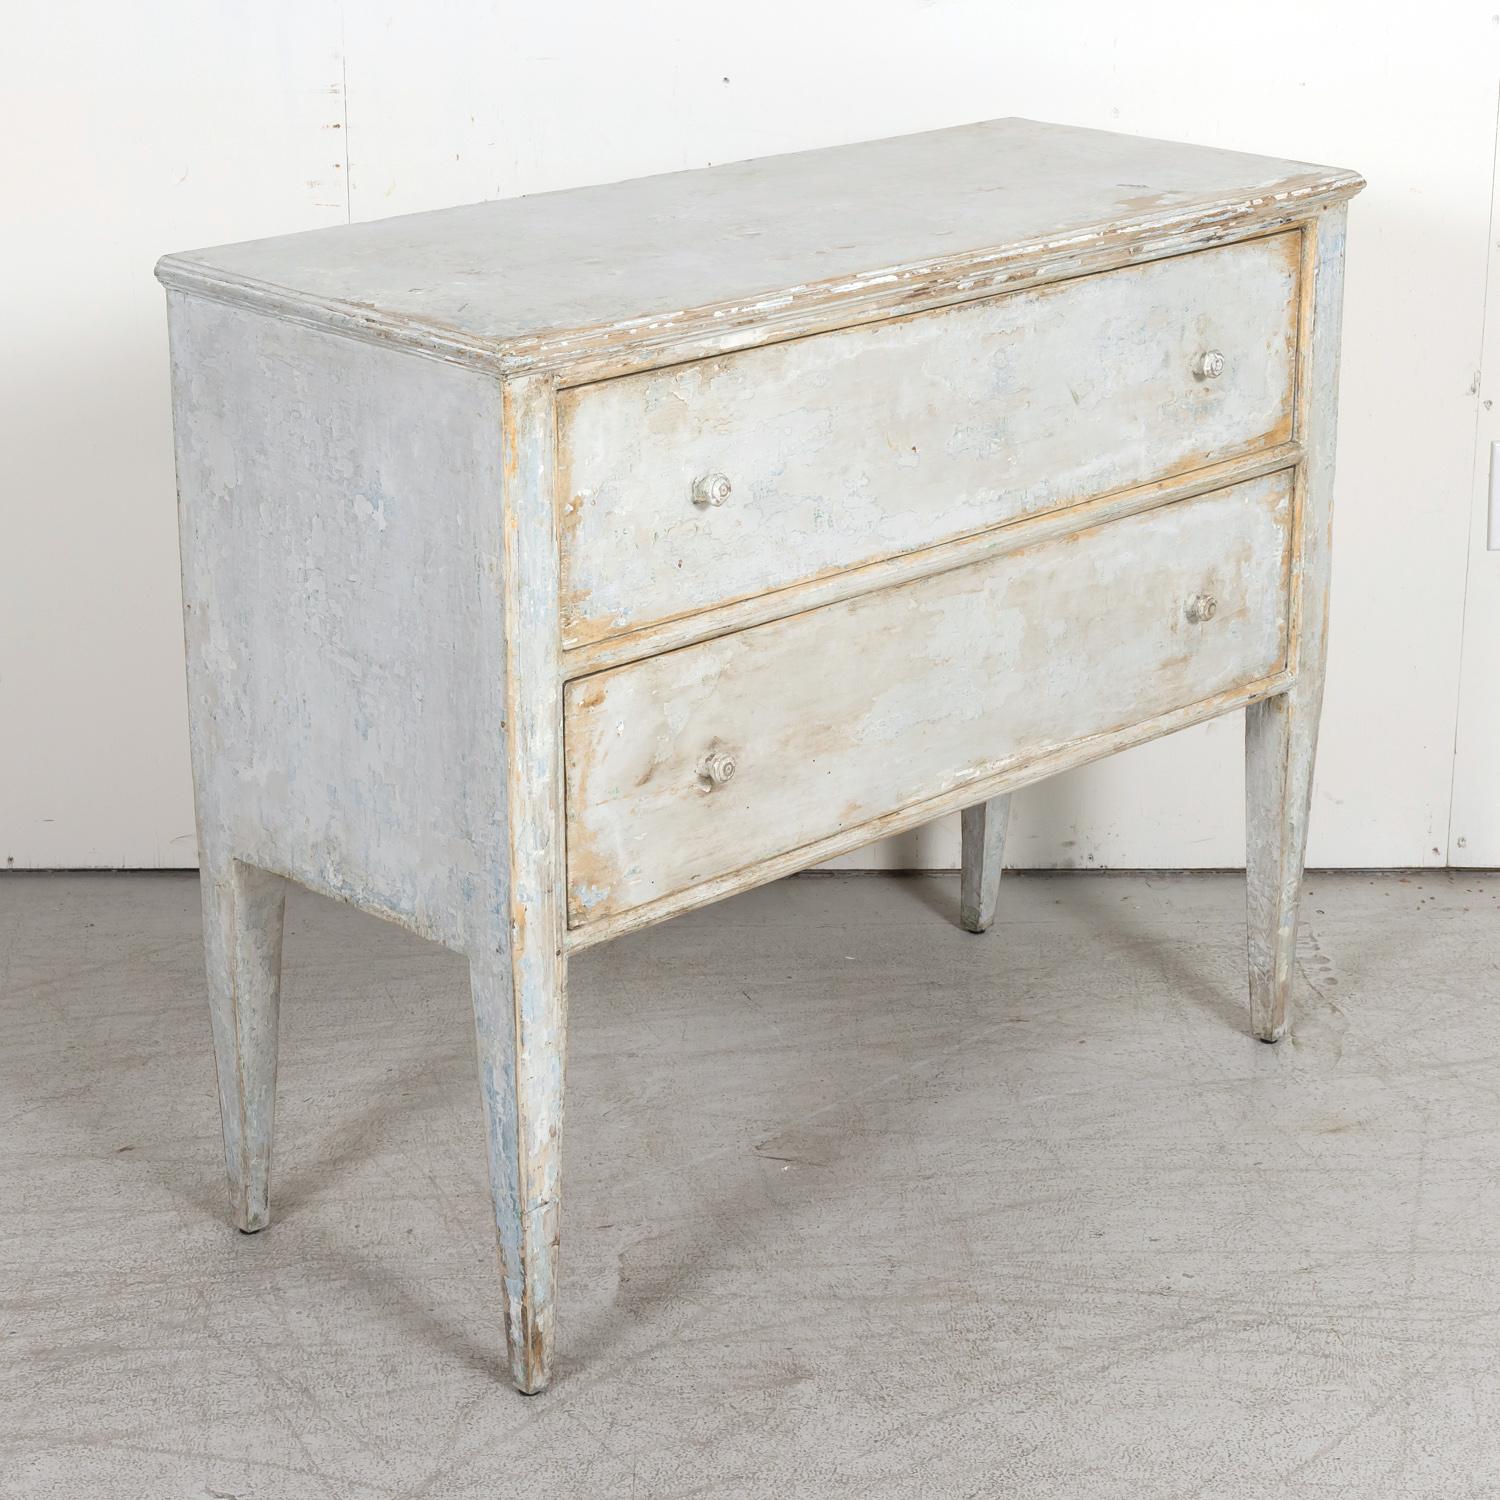 A 19th century French Louis XVI style commode sauteuse handcrafted in oak with a painted finish, circa 1880s. Painted in France, this handsome bluish gray colored chest of drawers features clean lines and a wonderful patinated finish. Also referred